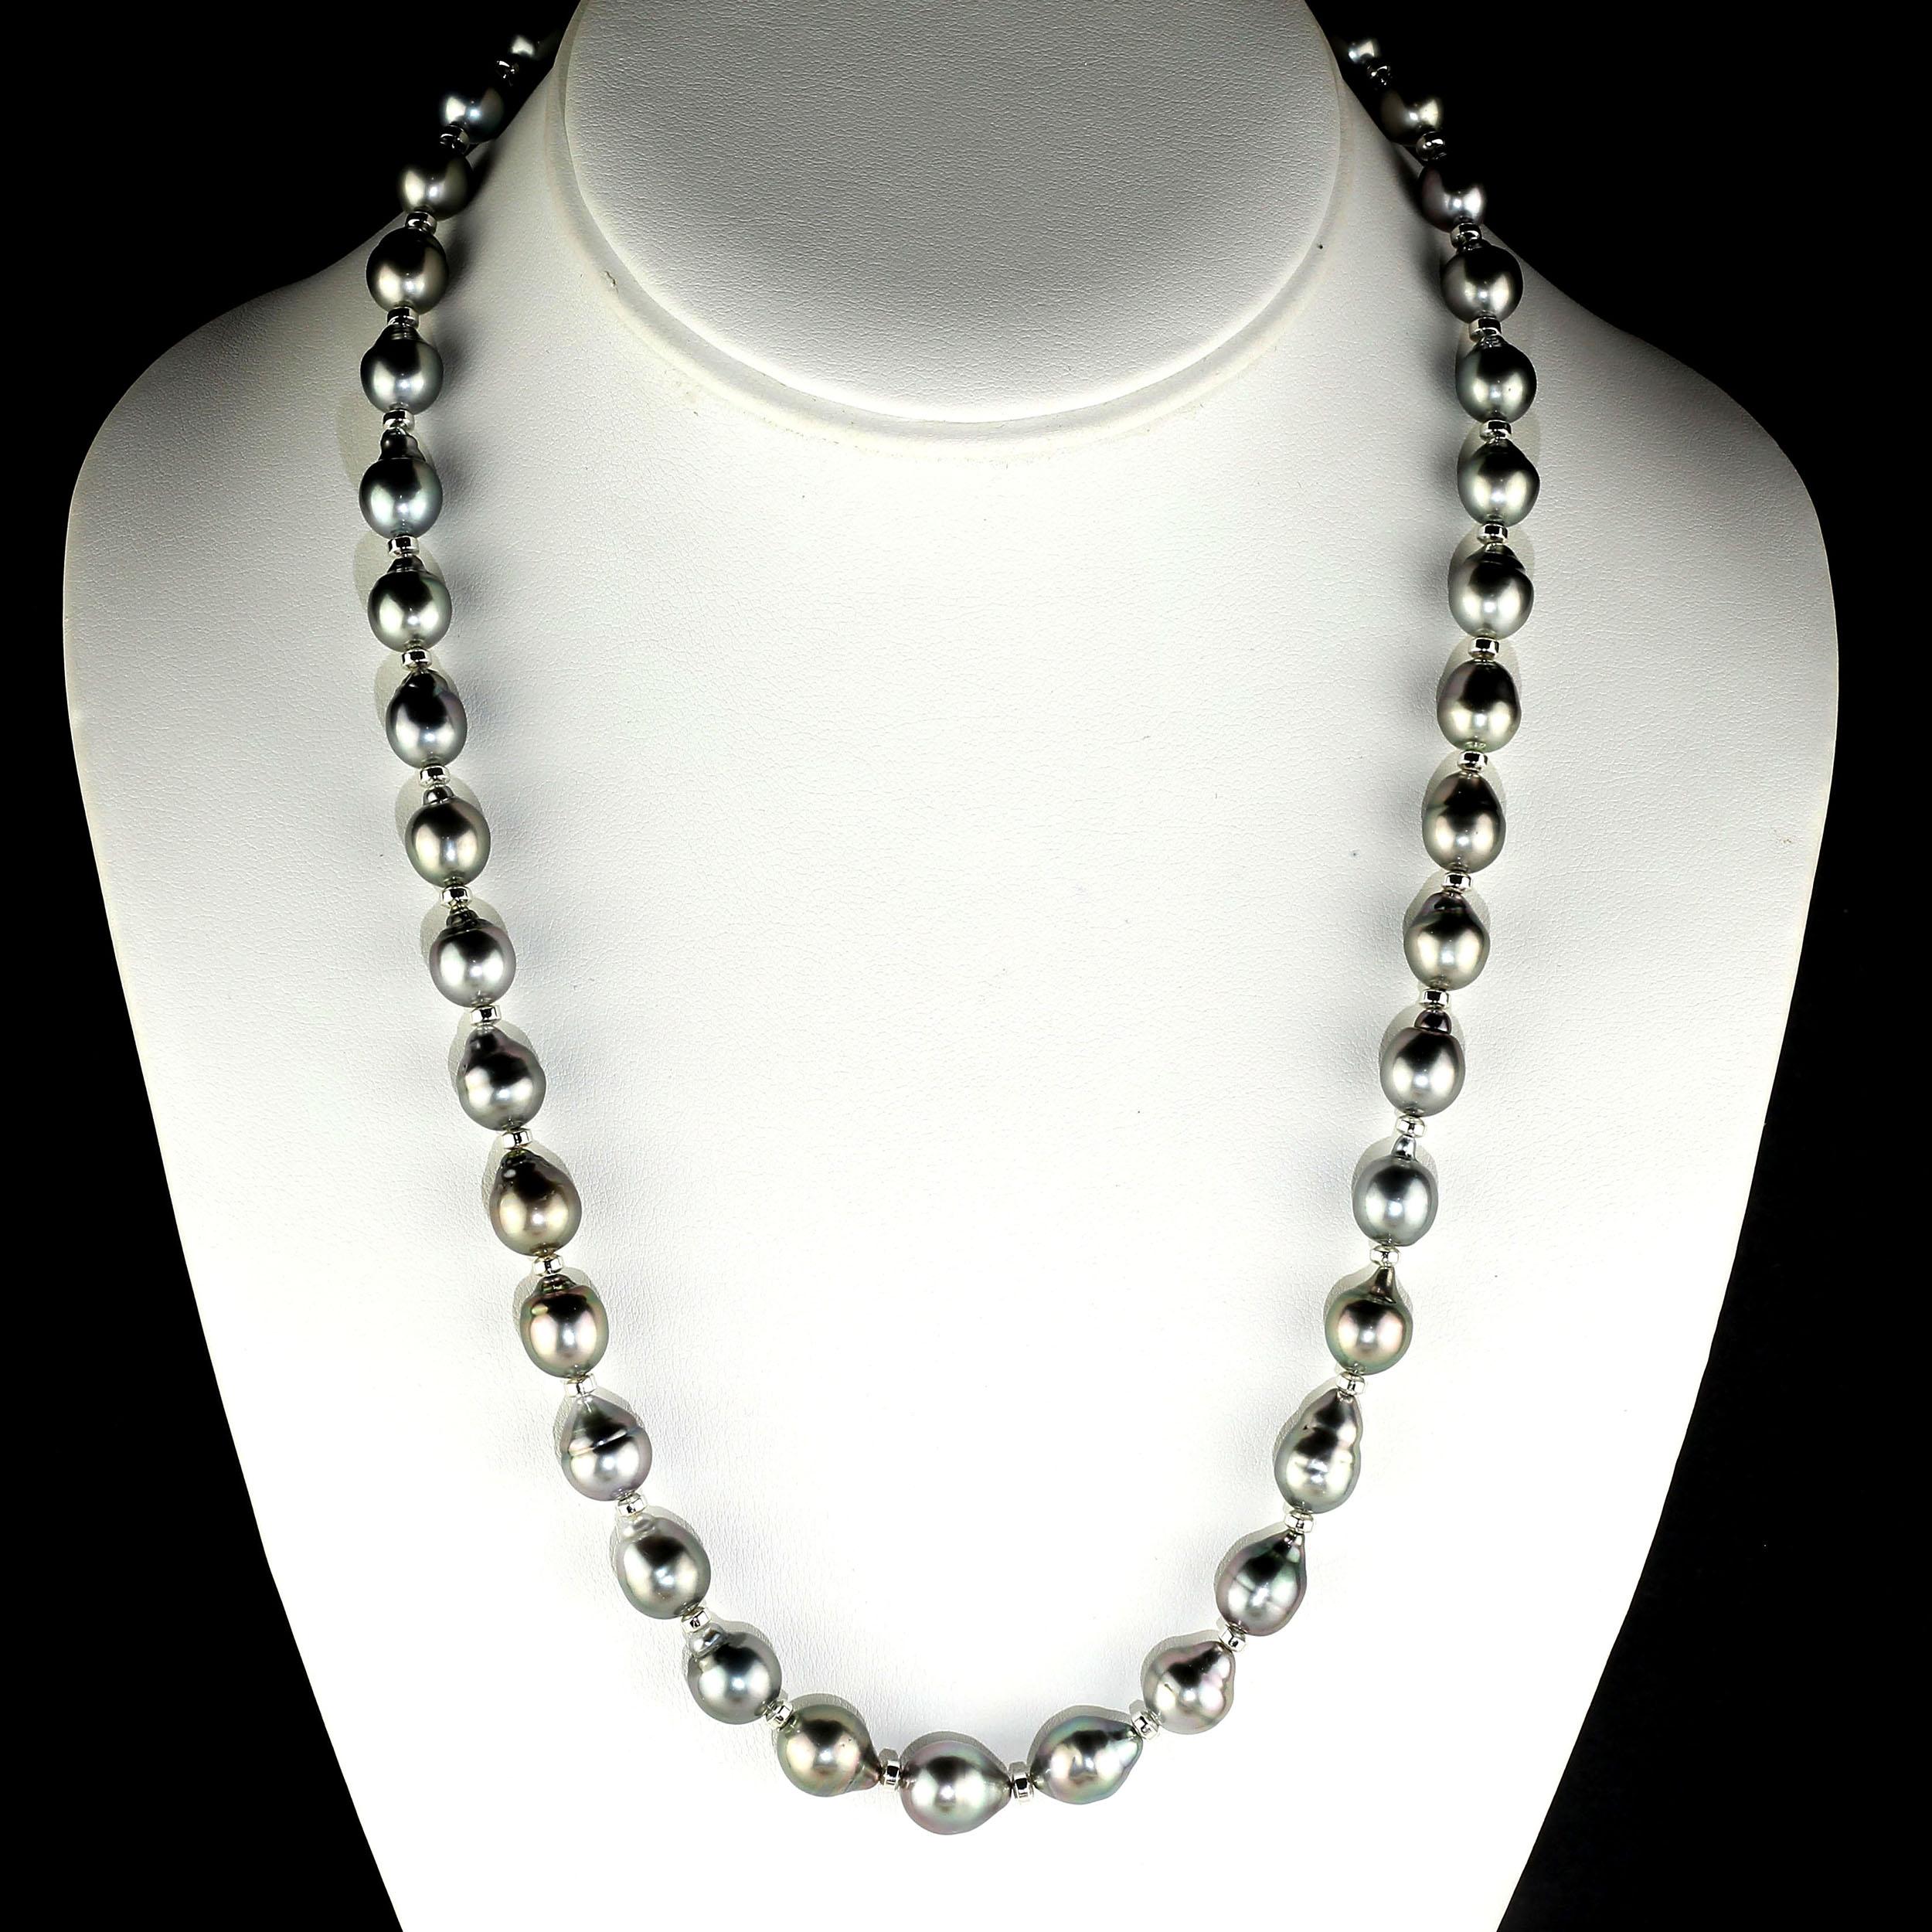 Artisan AJD Silver, Iridescent Tahitian Pearl Necklace & Silver Accents June Birthstone